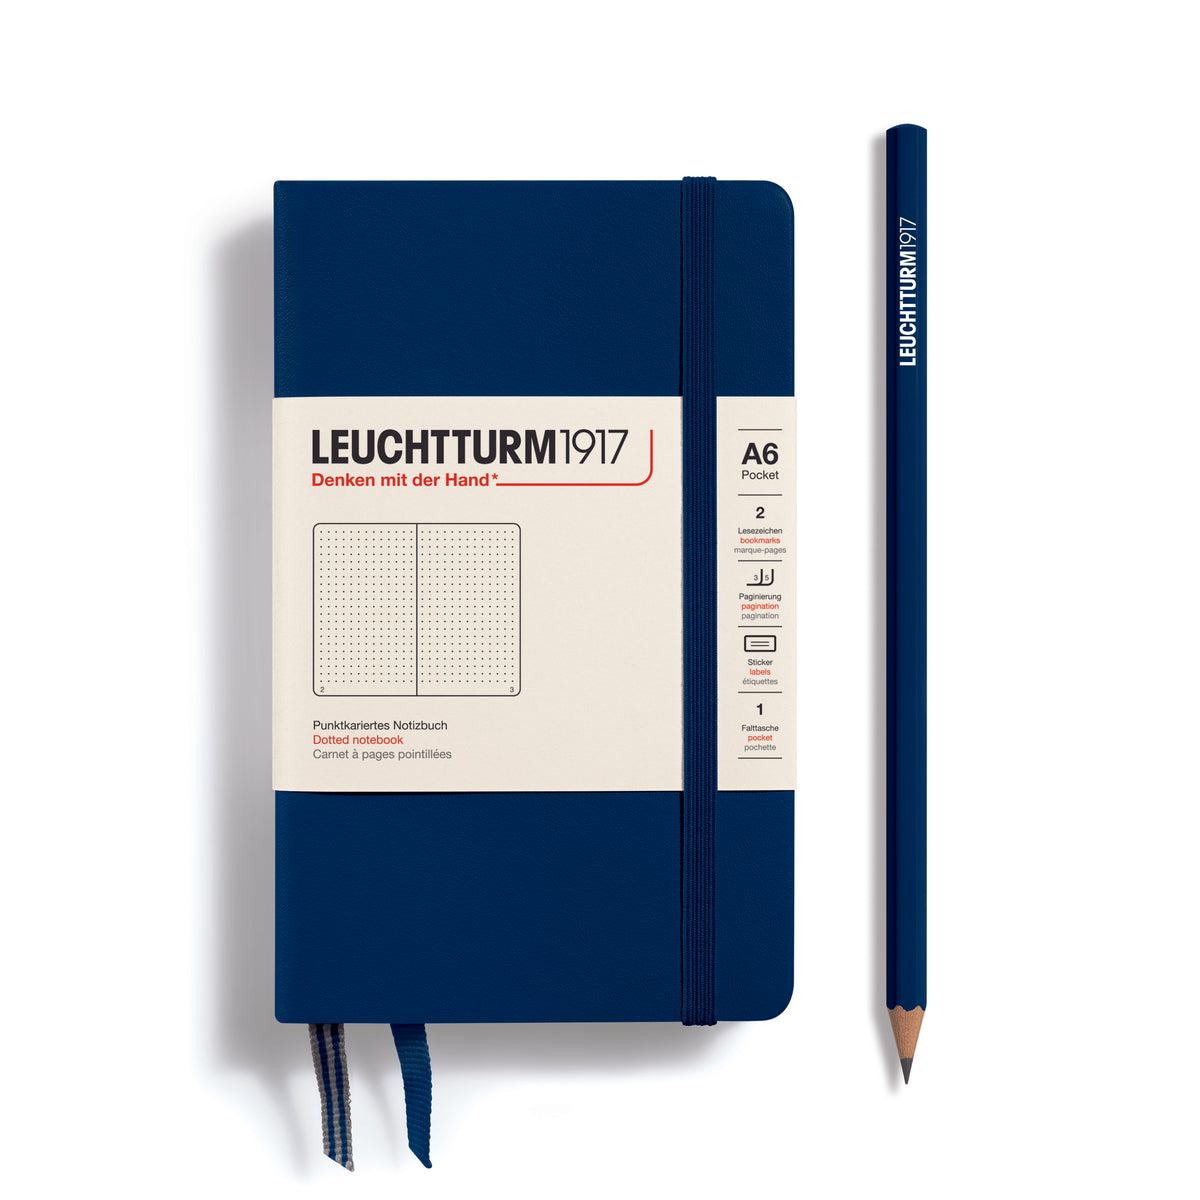 Leuchtturm1917 Notebook A6 Pocket Hardcover in navy - Penny Black - dotted ruling 